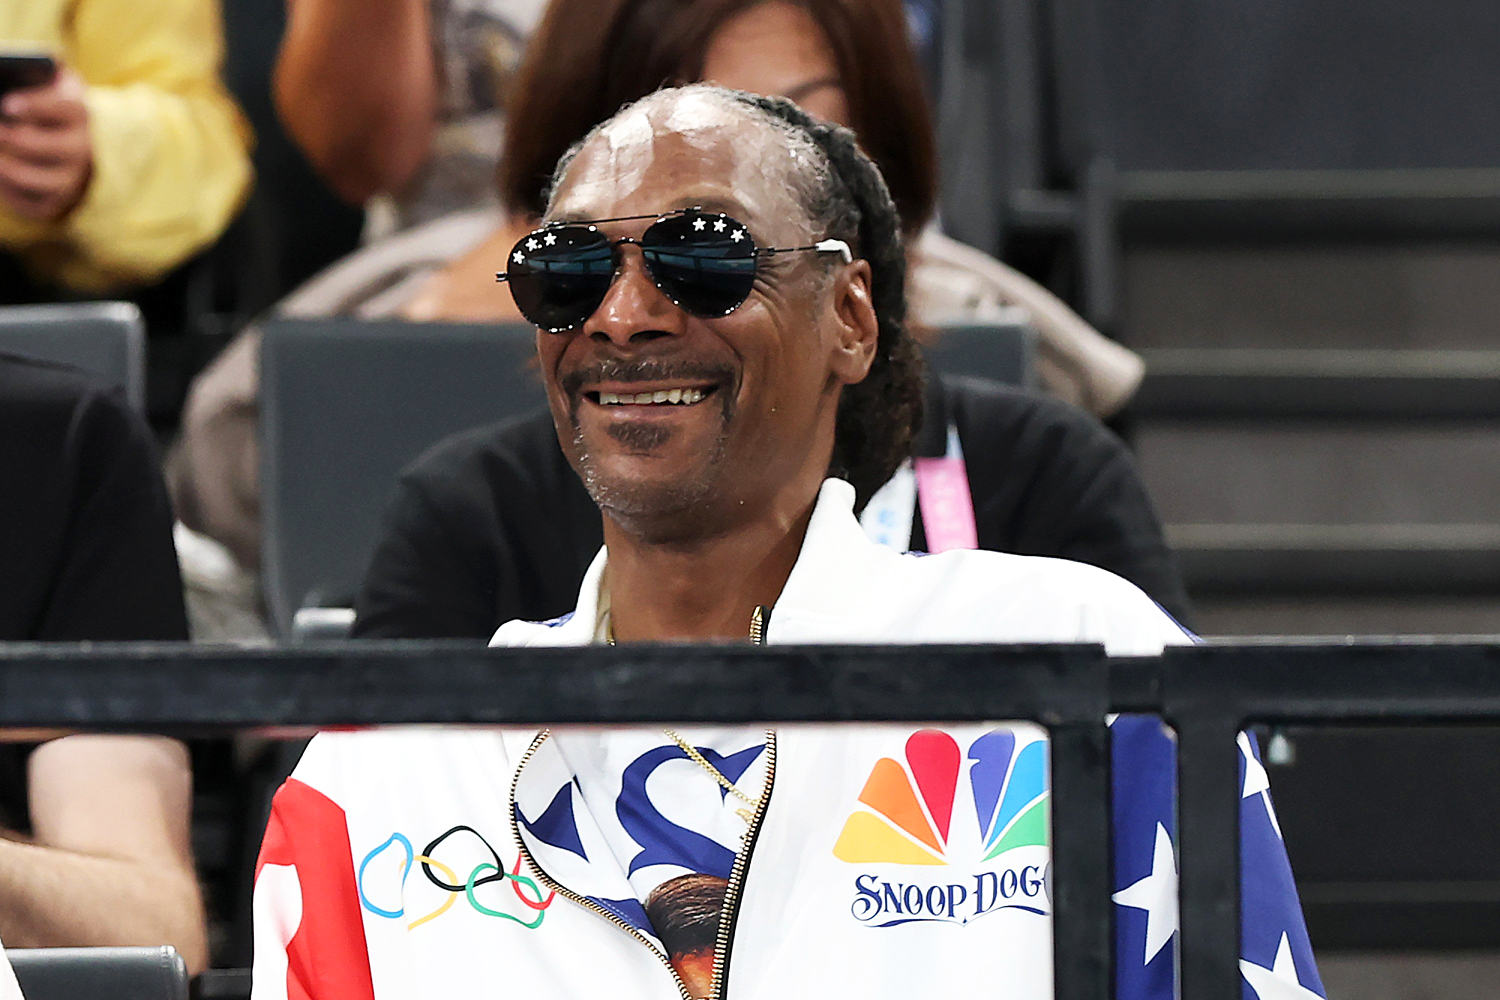 For Olympic pin collectors in Paris, Snoop Dogg's design takes the gold